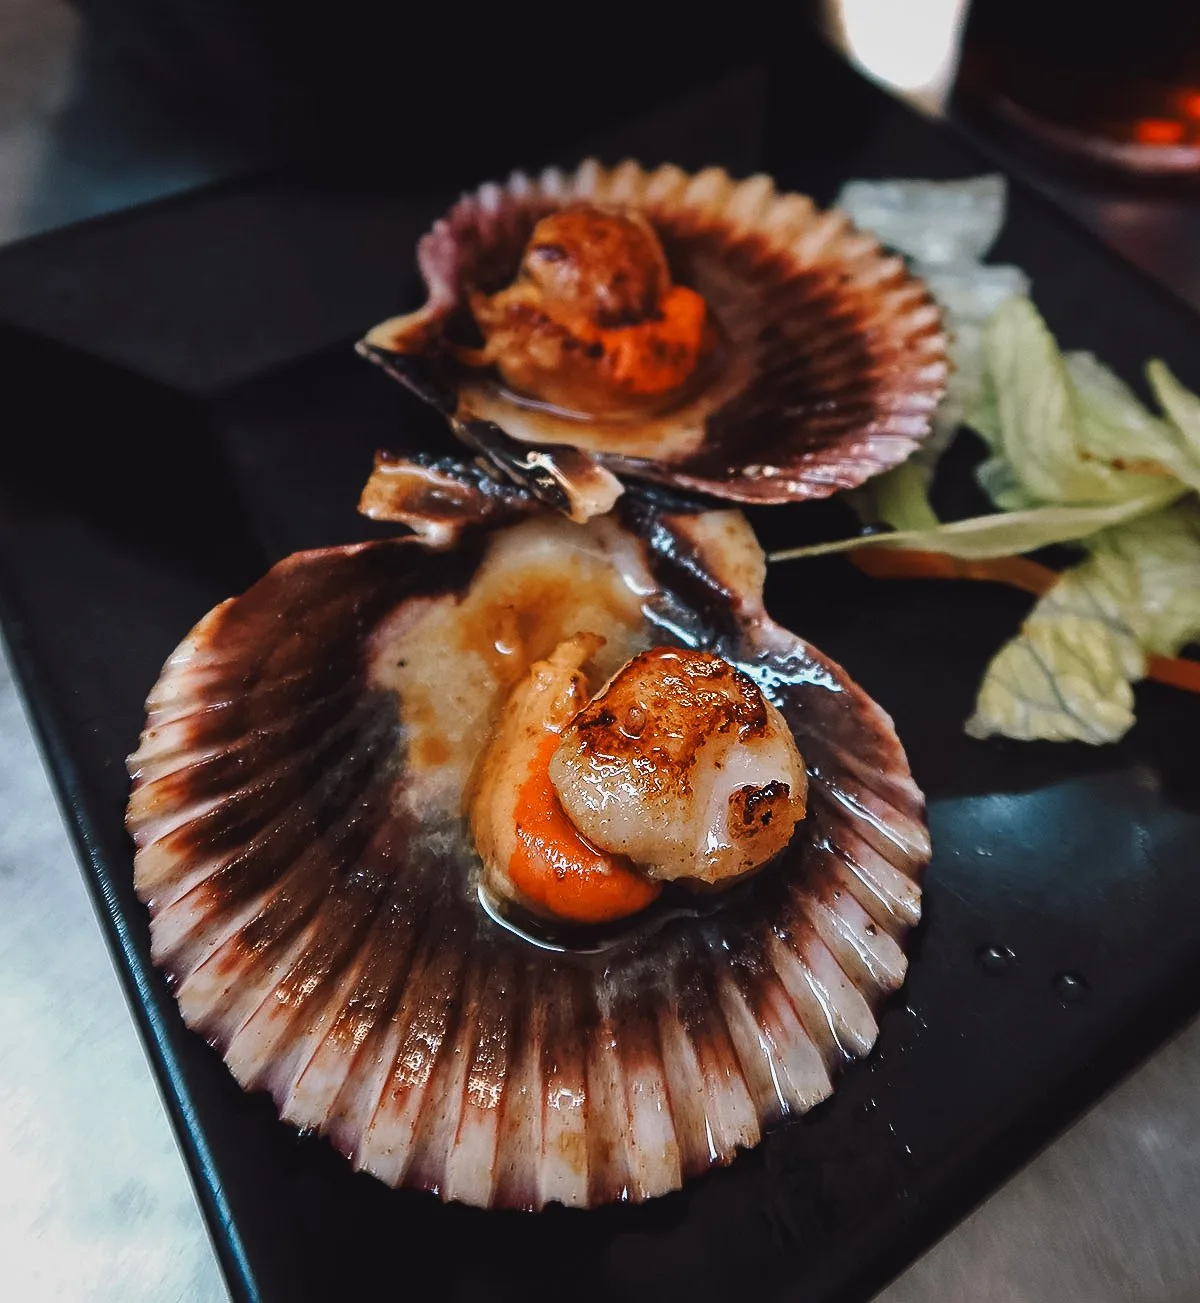 Scallops at a restaurant in Seville